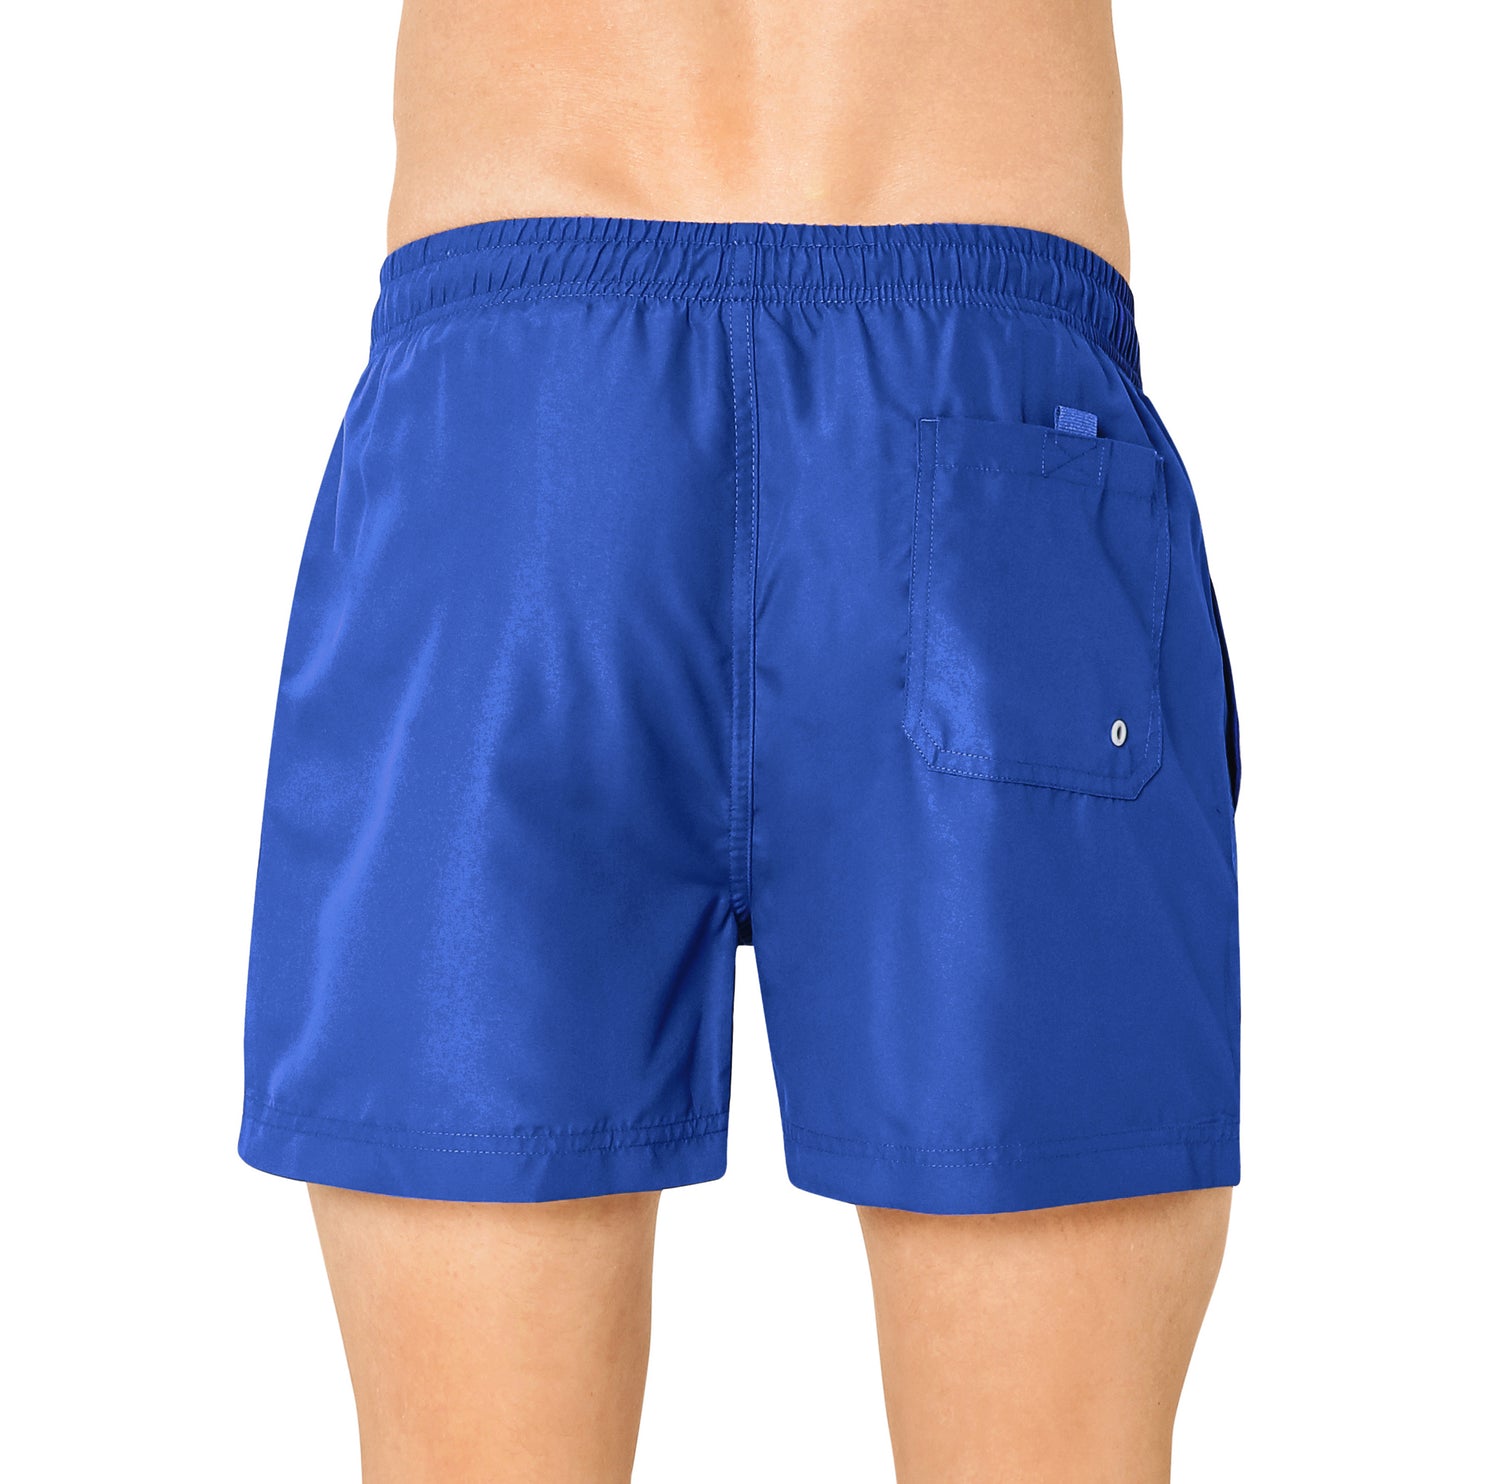 Swim shorts with mesh lining, BLUE color. With travel pouch!